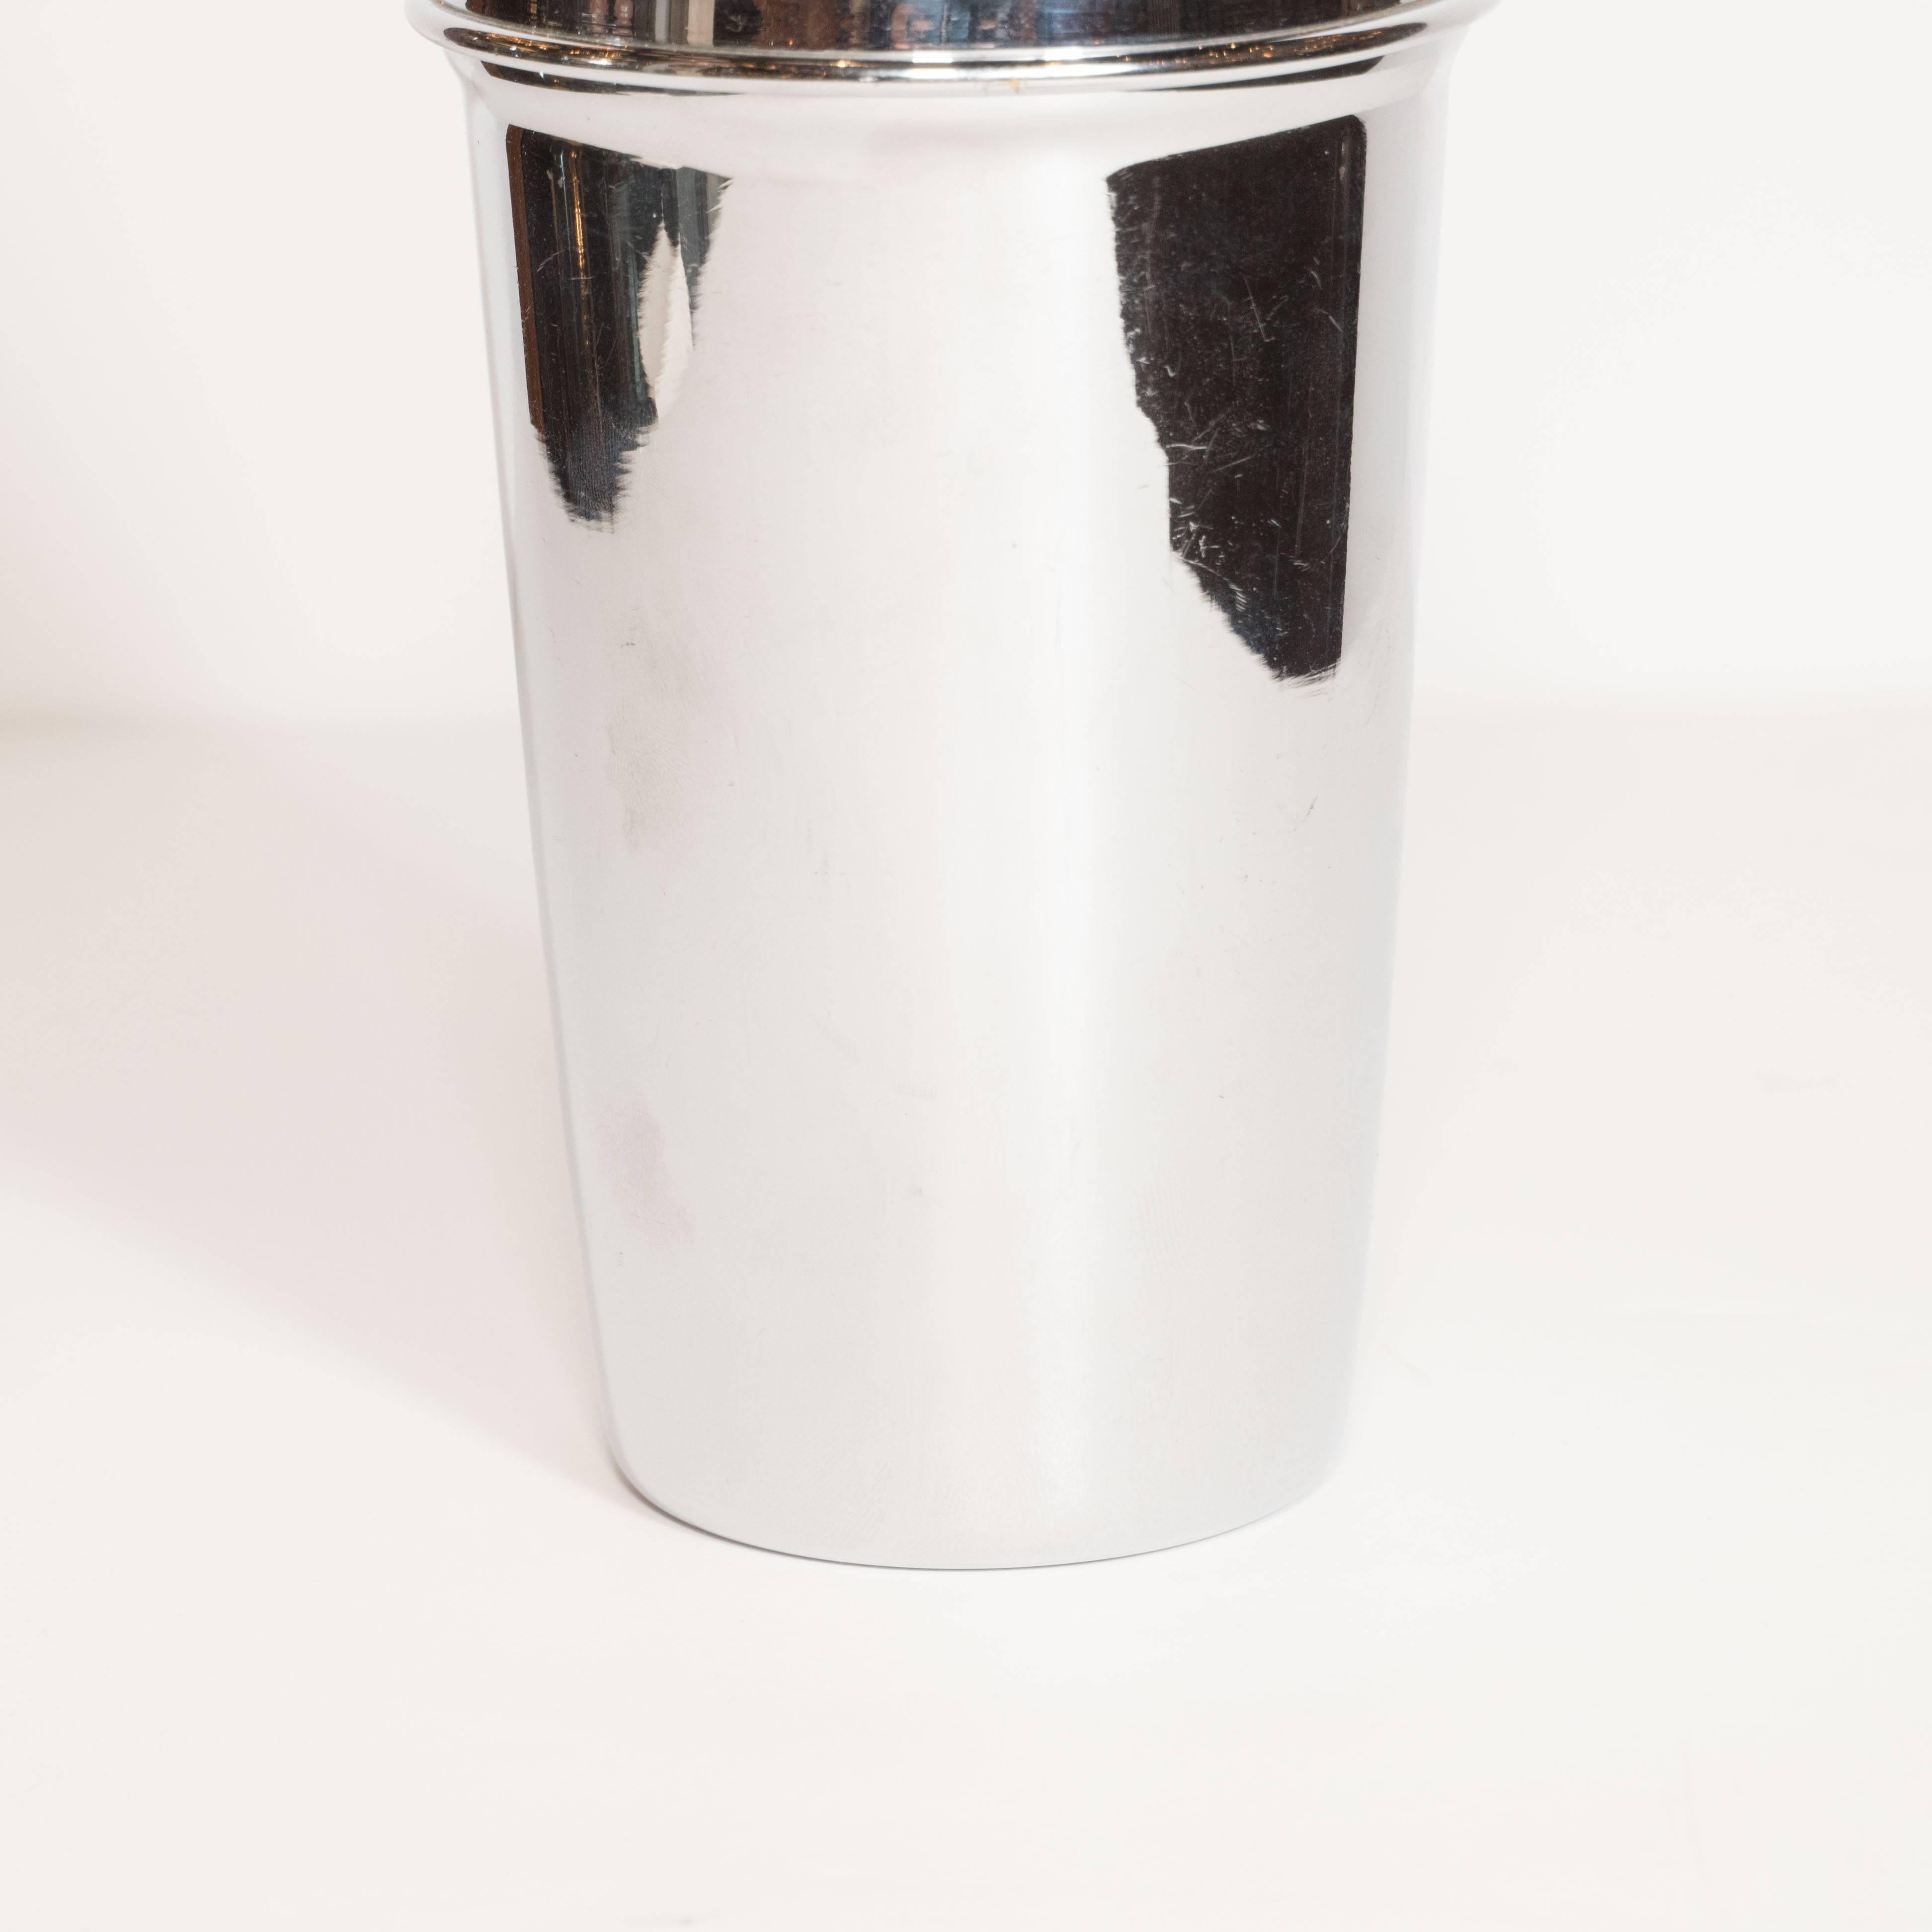 This Italian chrome cocktail shaker is made of chrome, features a removable top with a built in strainer. Its clean lines recalls Machine Age Art Deco design. It would be an elegant addition to any bar set. Excellent condition.

Italian, 20th